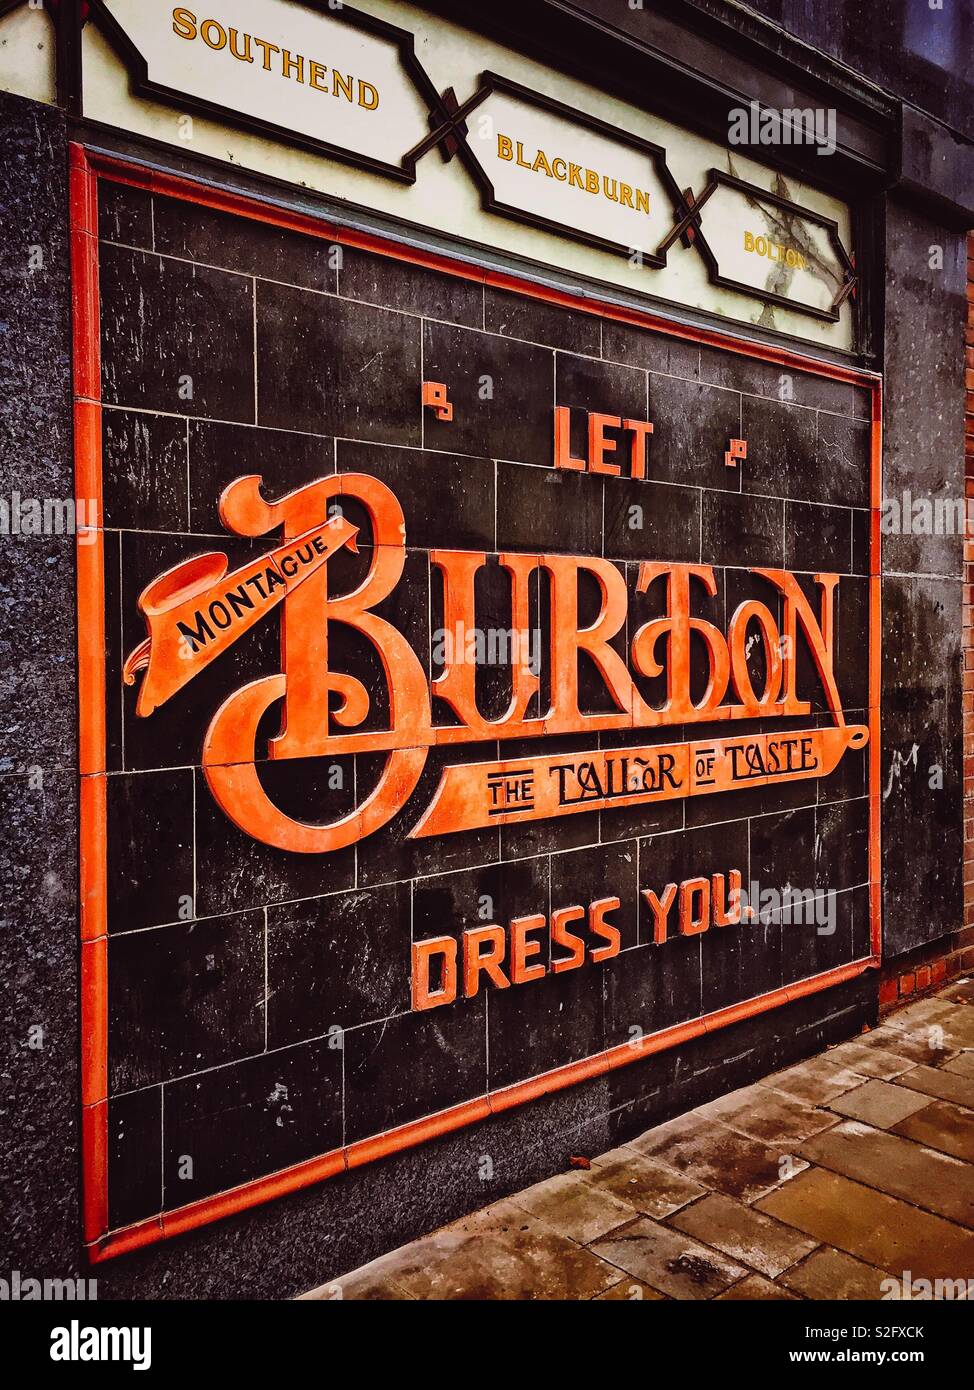 Let Montague Burton dress you... The tailor of taste. The original 1930’s Art Deco tiled relief outside the Burtons Menswear Shop in Abergavenny, Wales, UK. Stock Photo